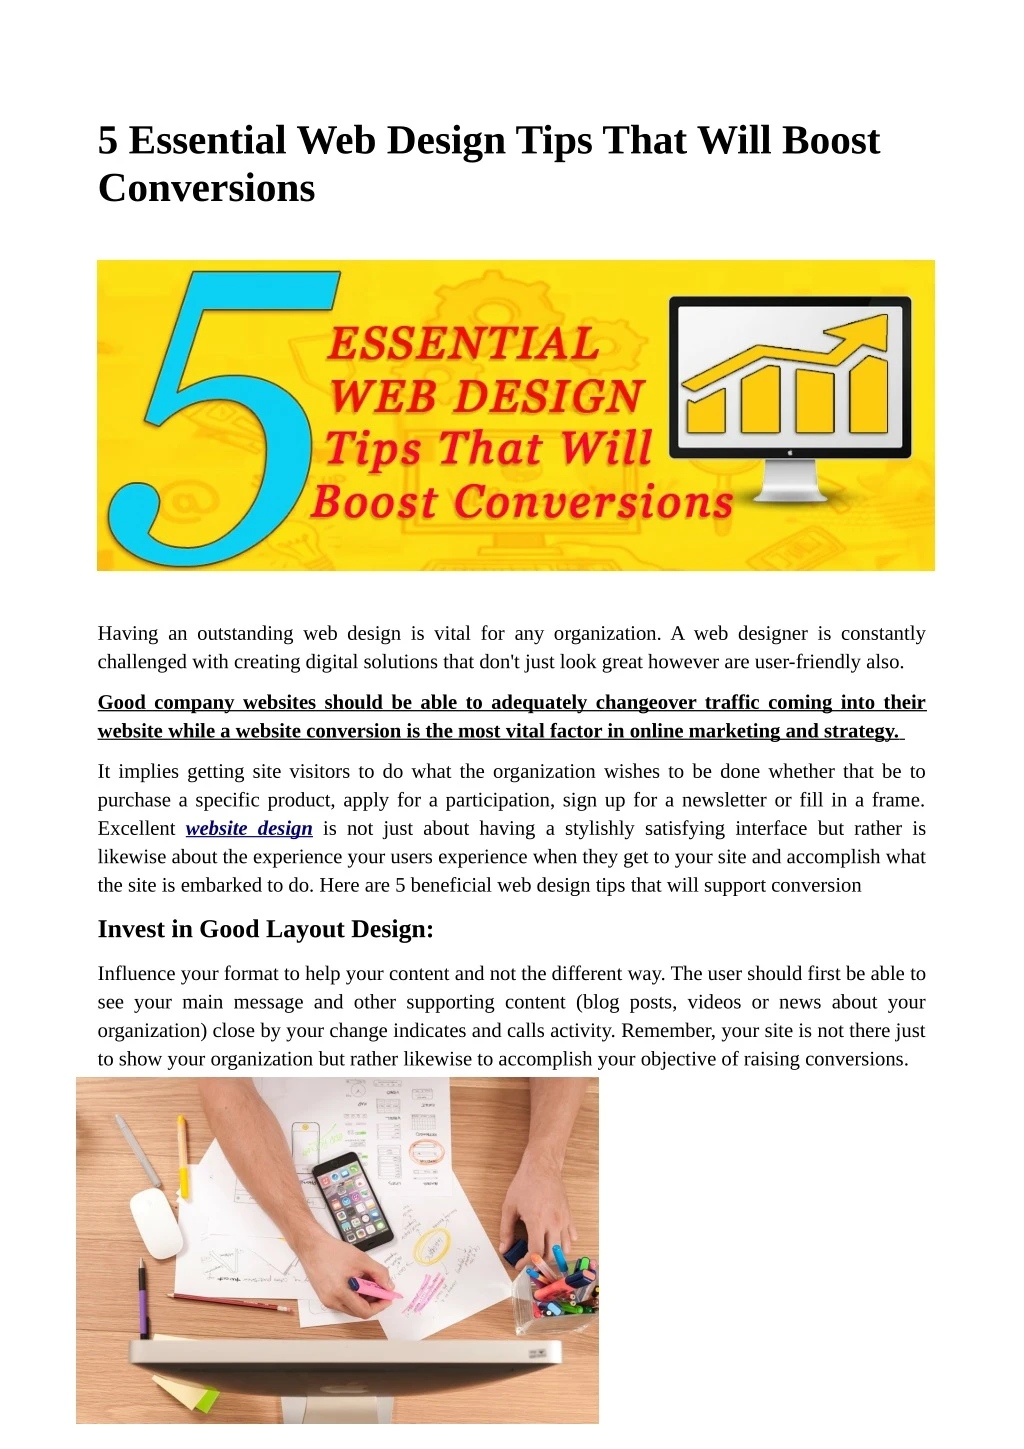 5 essential web design tips that will boost